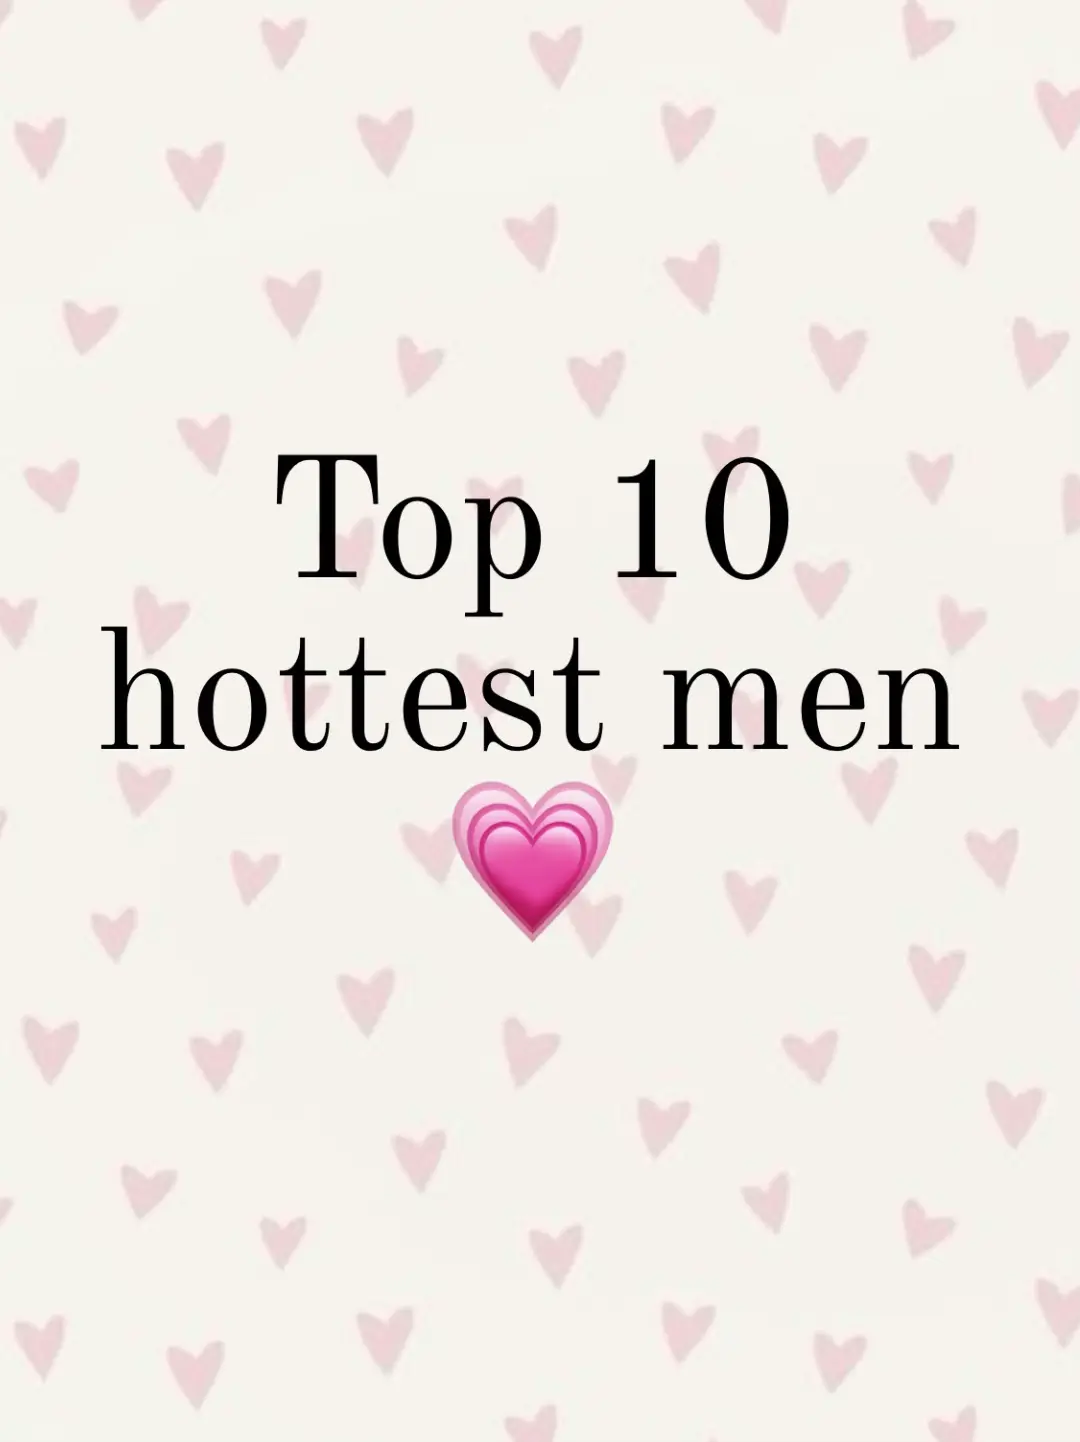  A list of the top 10 hottest men.